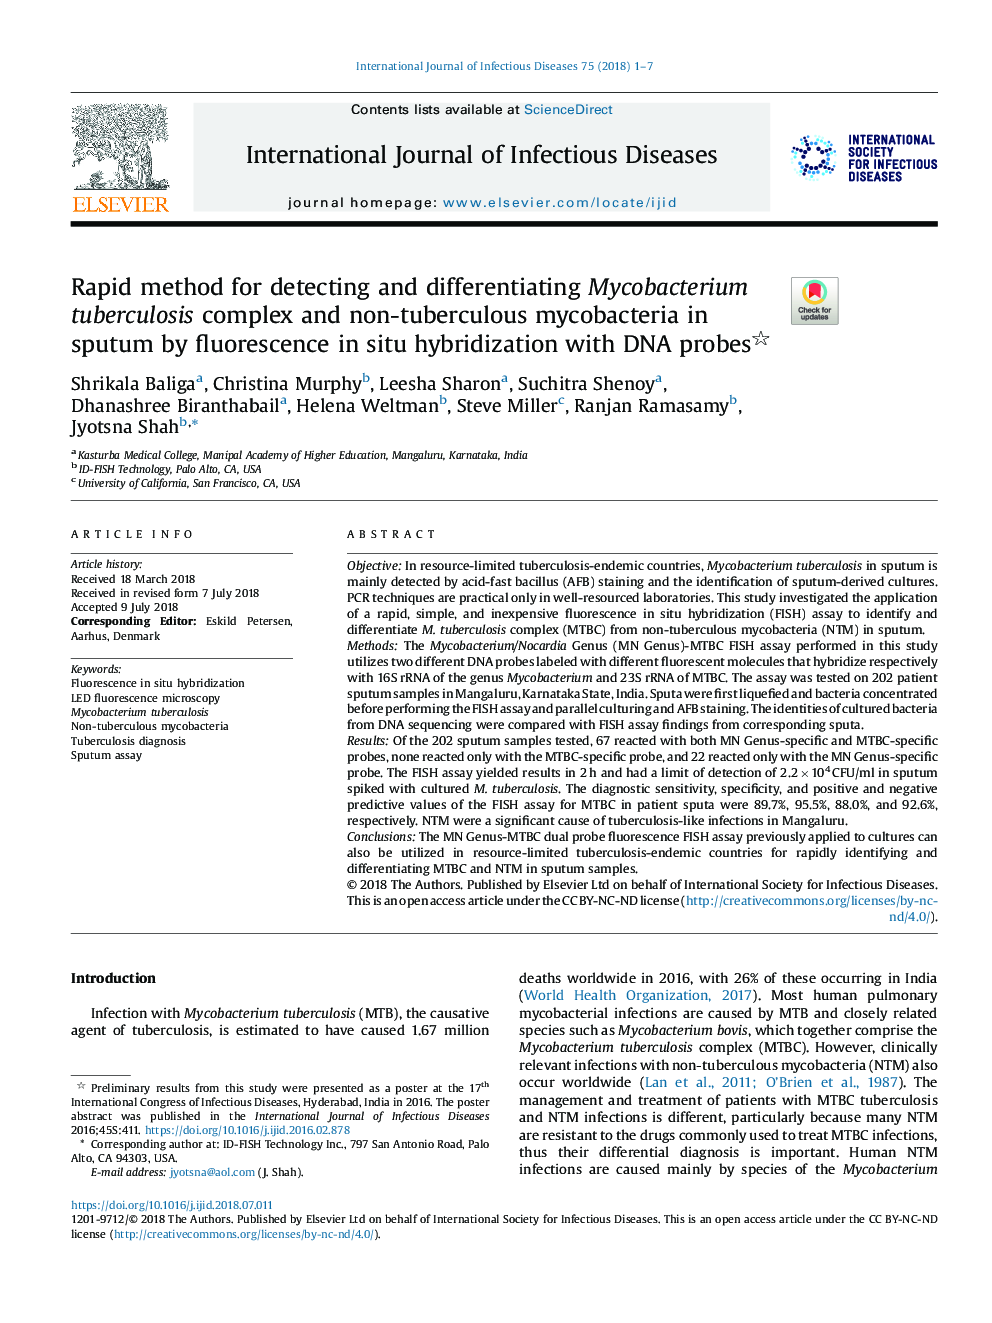 Rapid method for detecting and differentiating Mycobacterium tuberculosis complex and non-tuberculous mycobacteria in sputum by fluorescence in situ hybridization with DNA probes